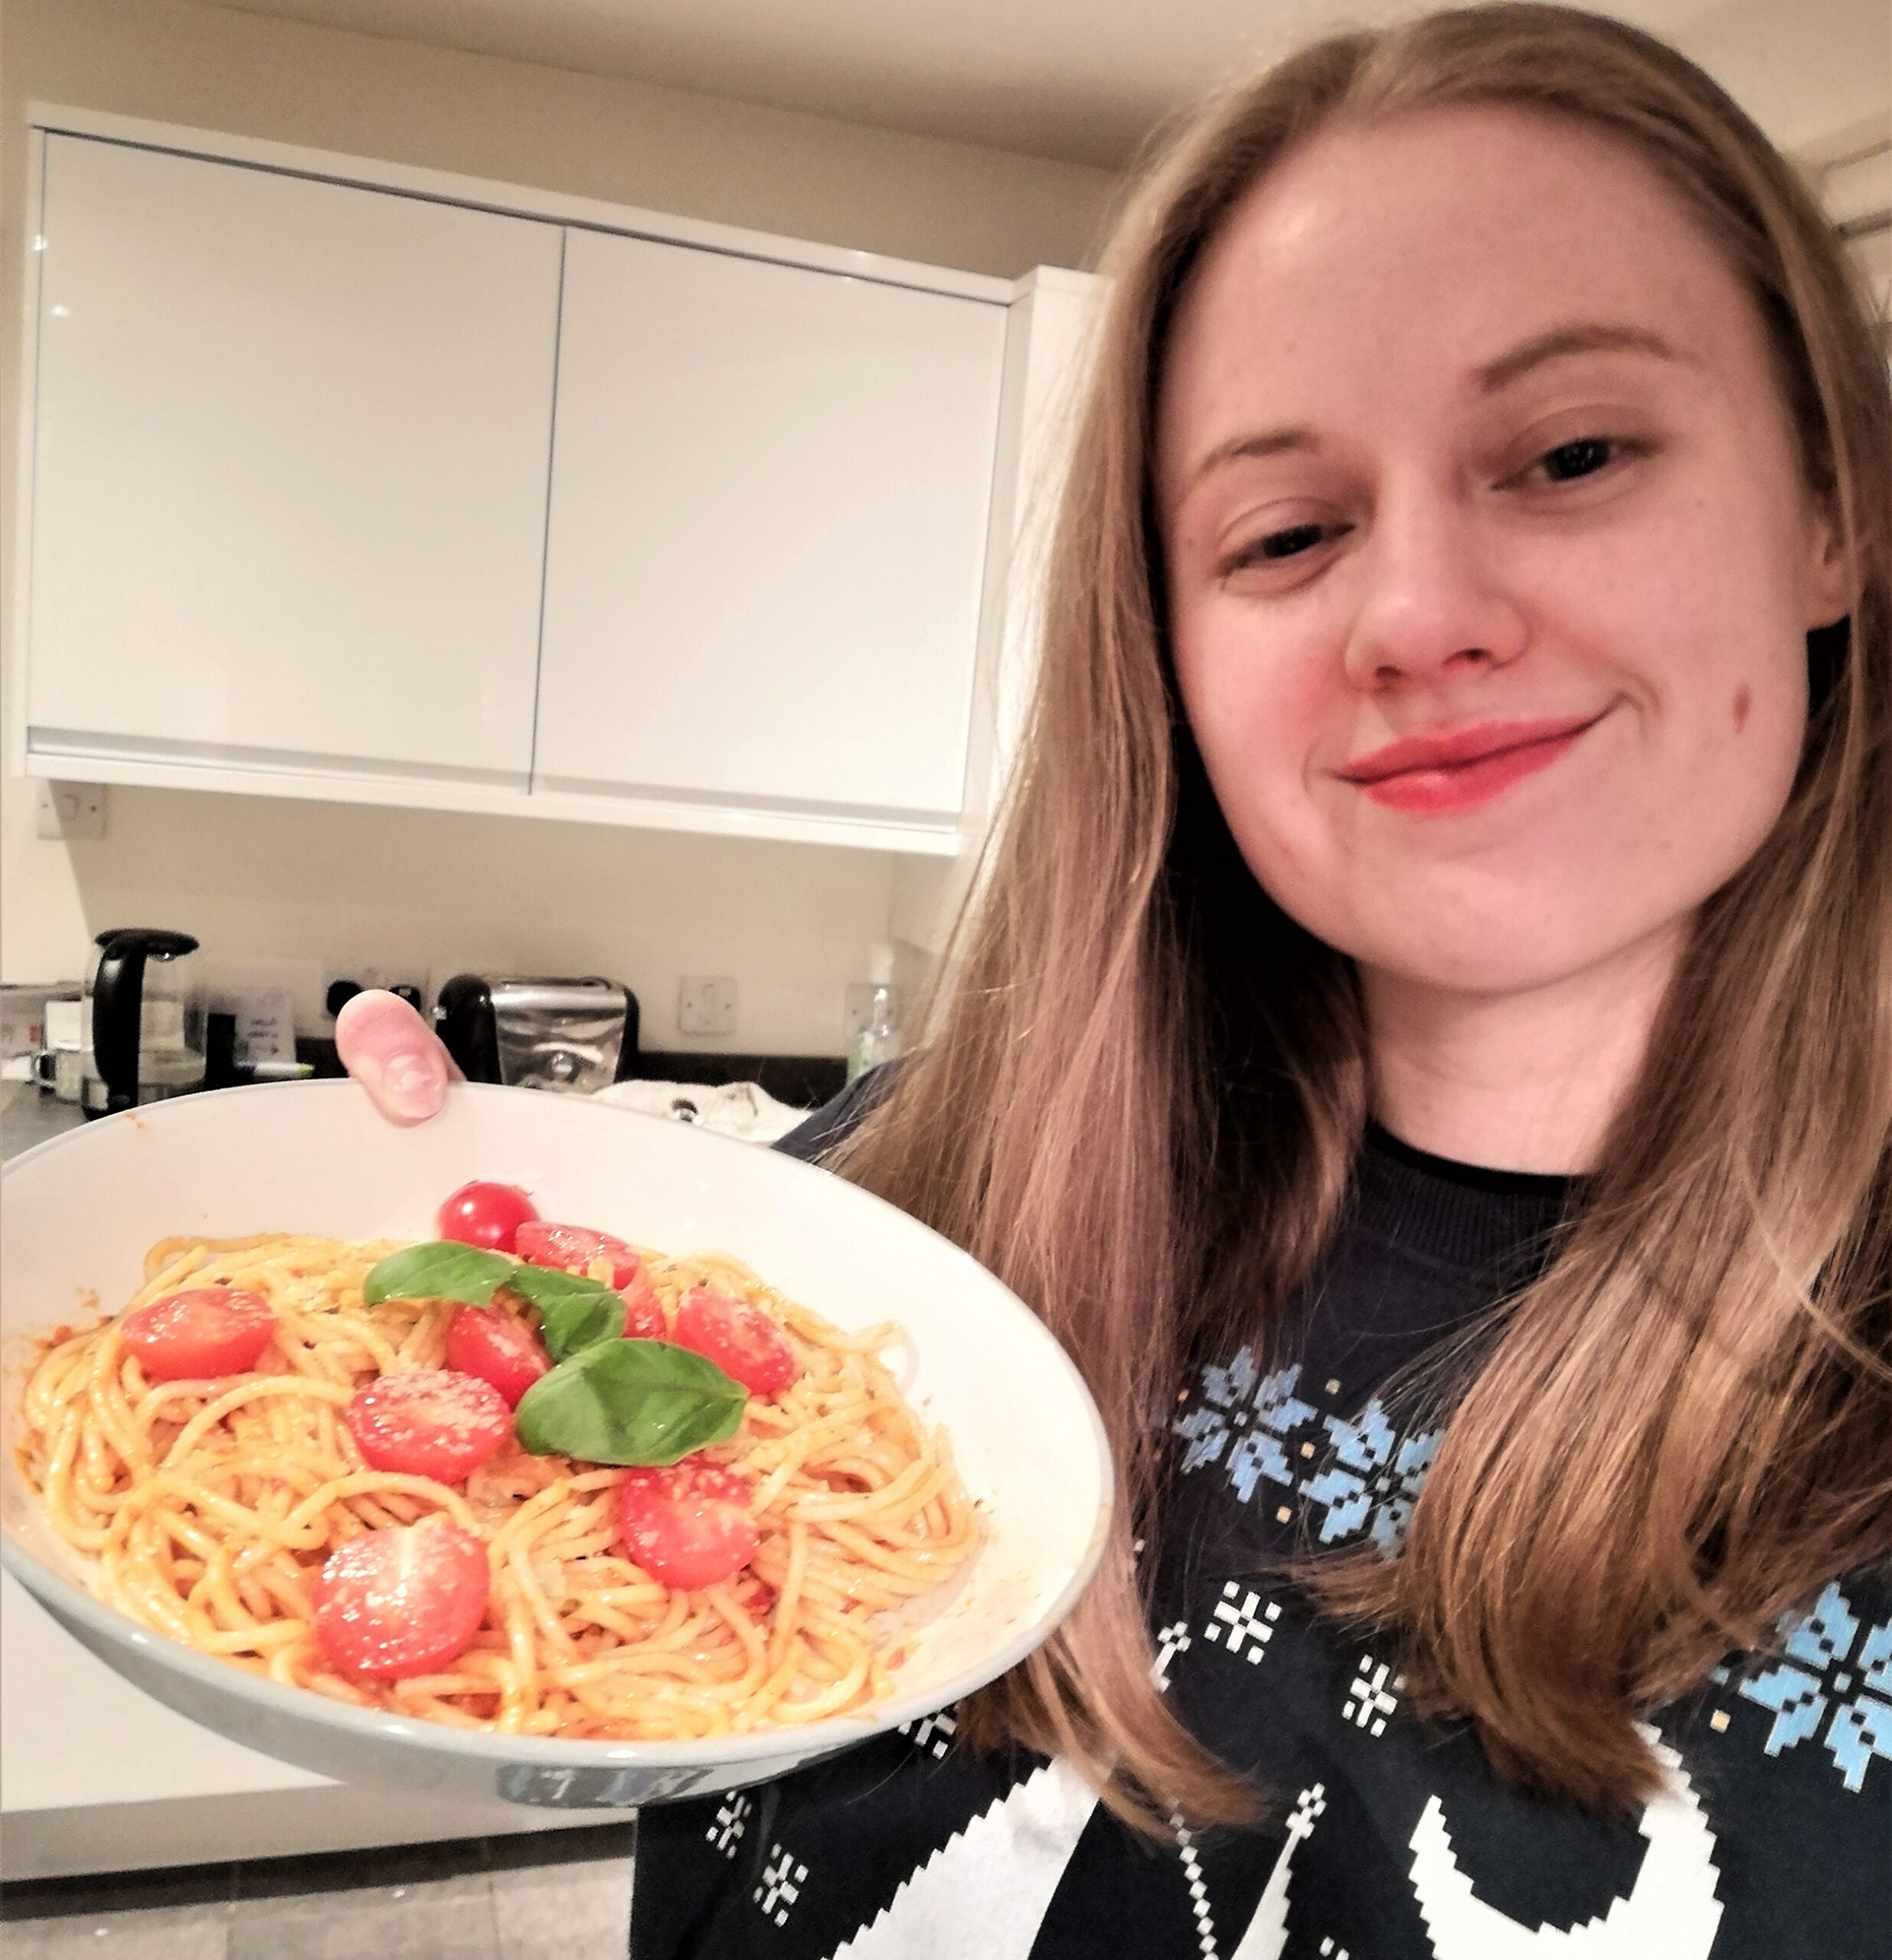 Kirsty smiles and holds up a plate of pasta decorated with cherry tomatoes and basil leaves. She's wearing a Greenpeace Christmas jumper